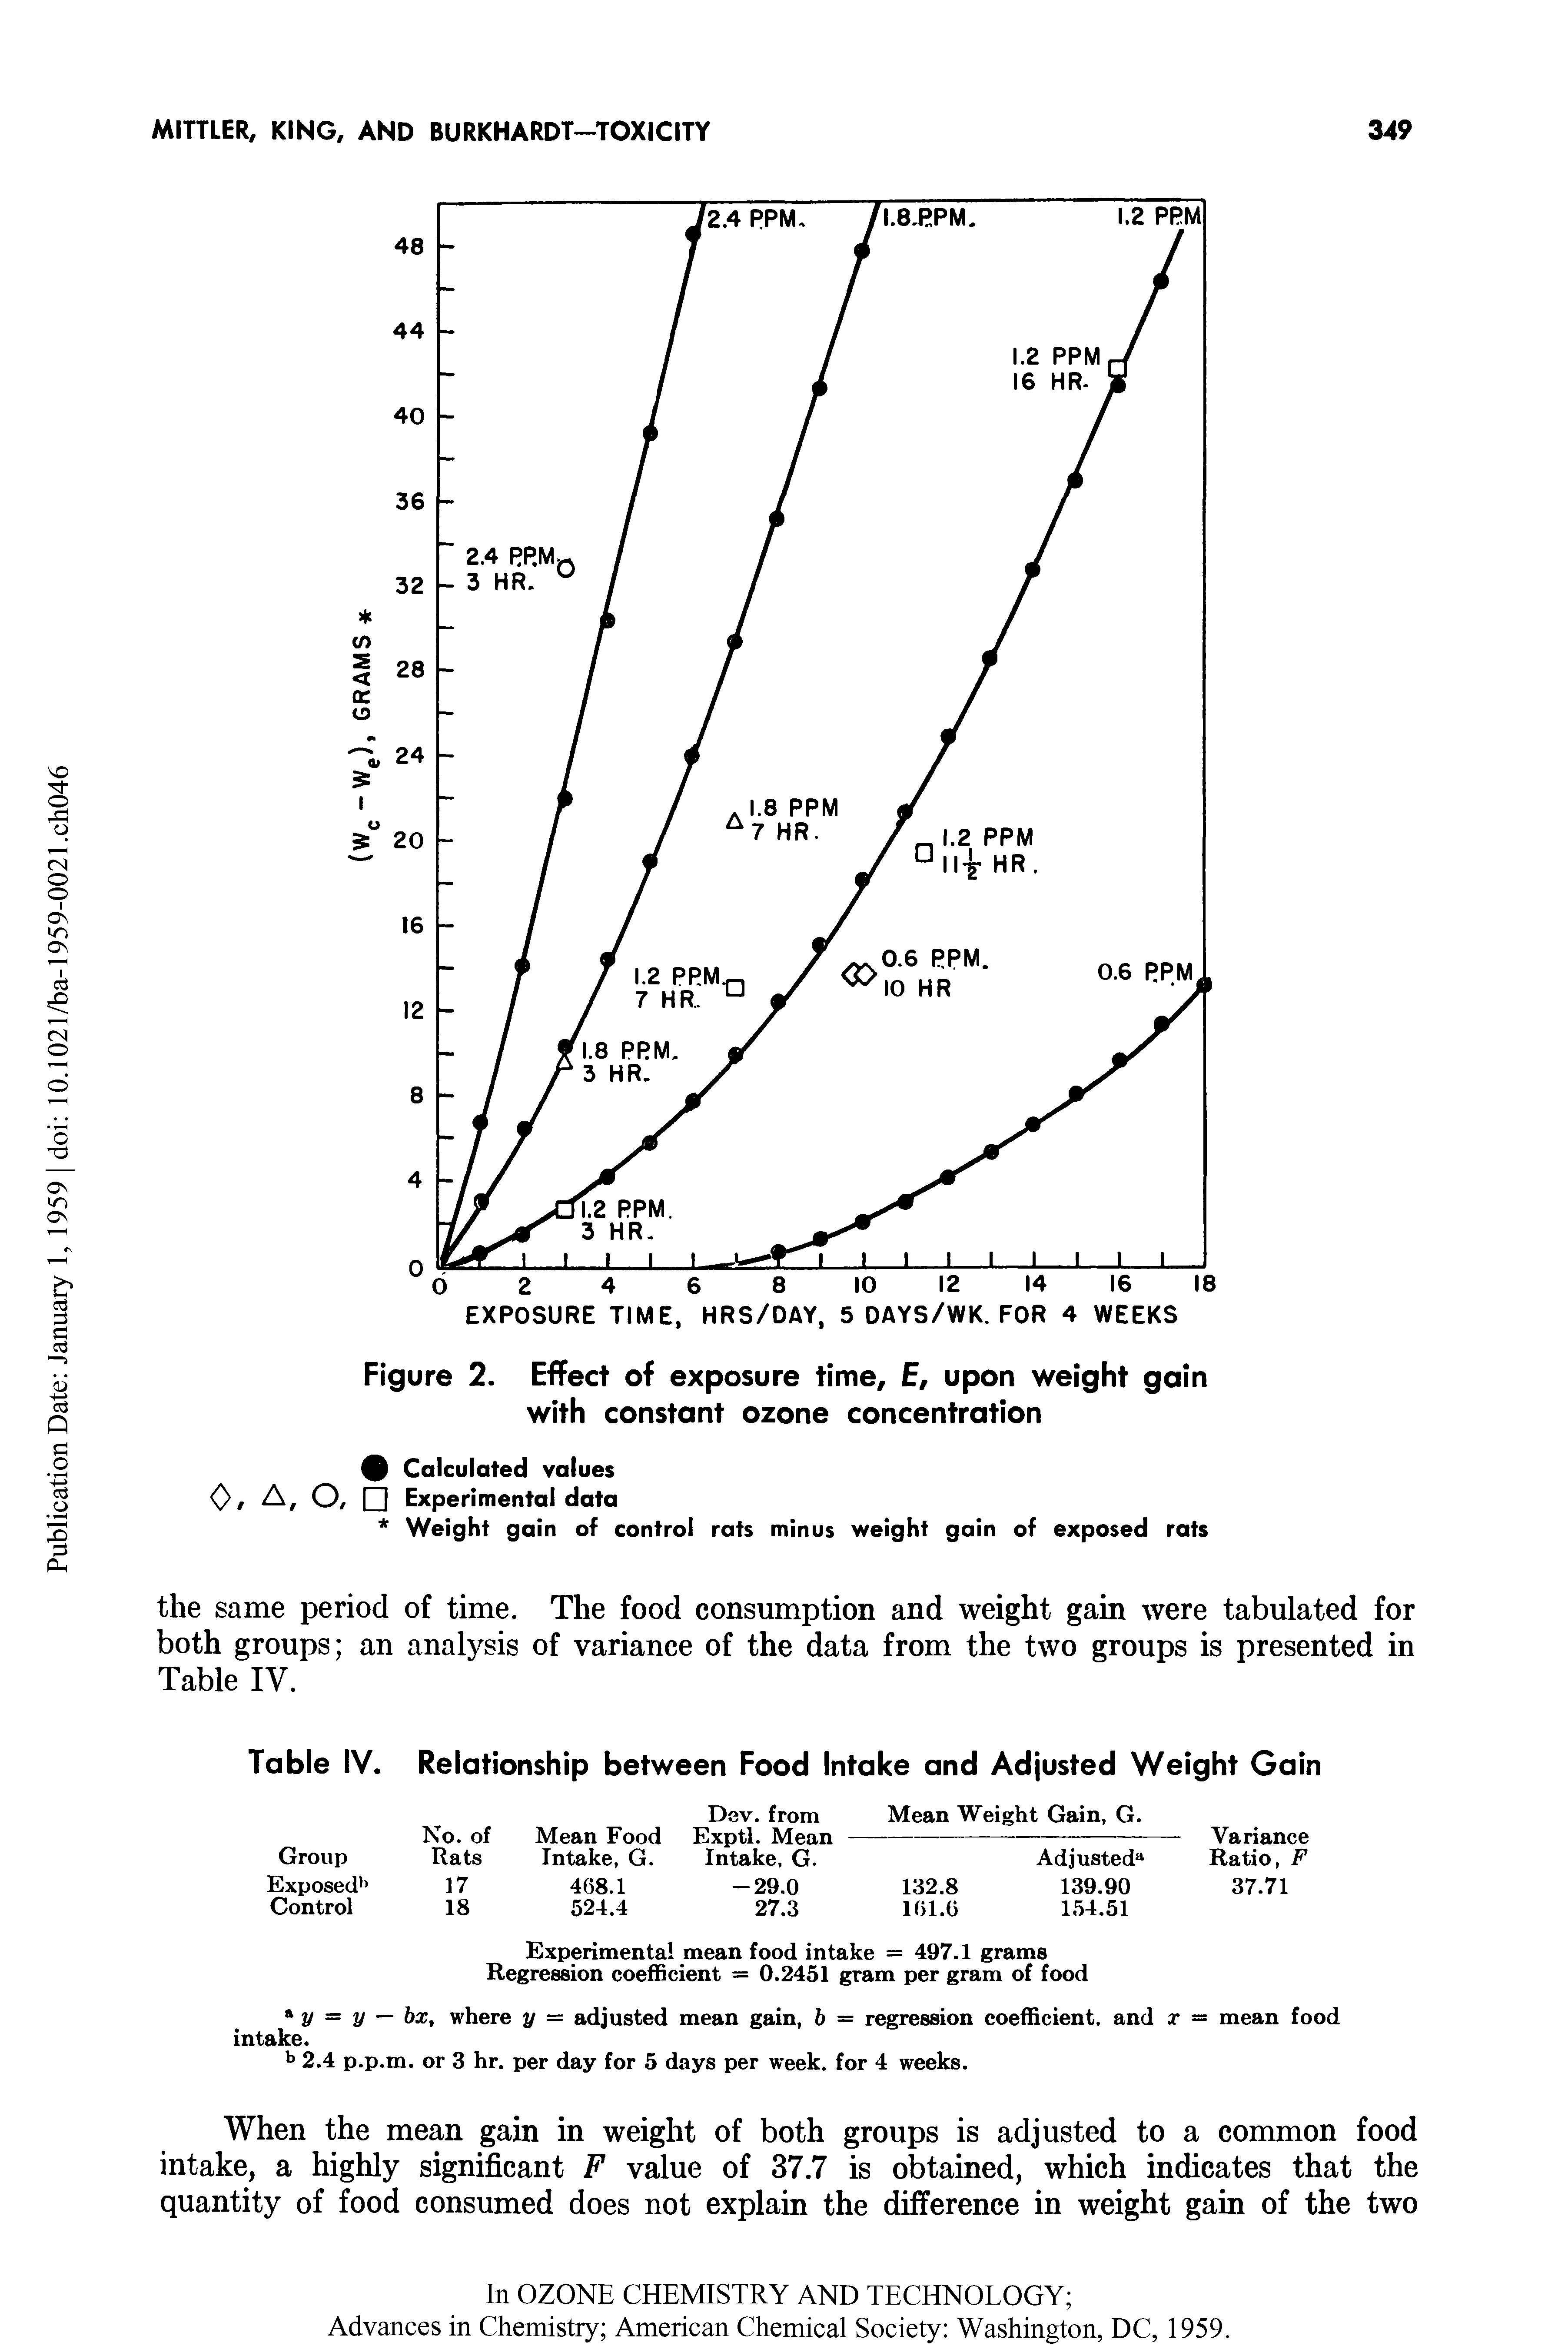 Figure 2. Effect of exposure time, E, upon weight gain with constant ozone concentration...